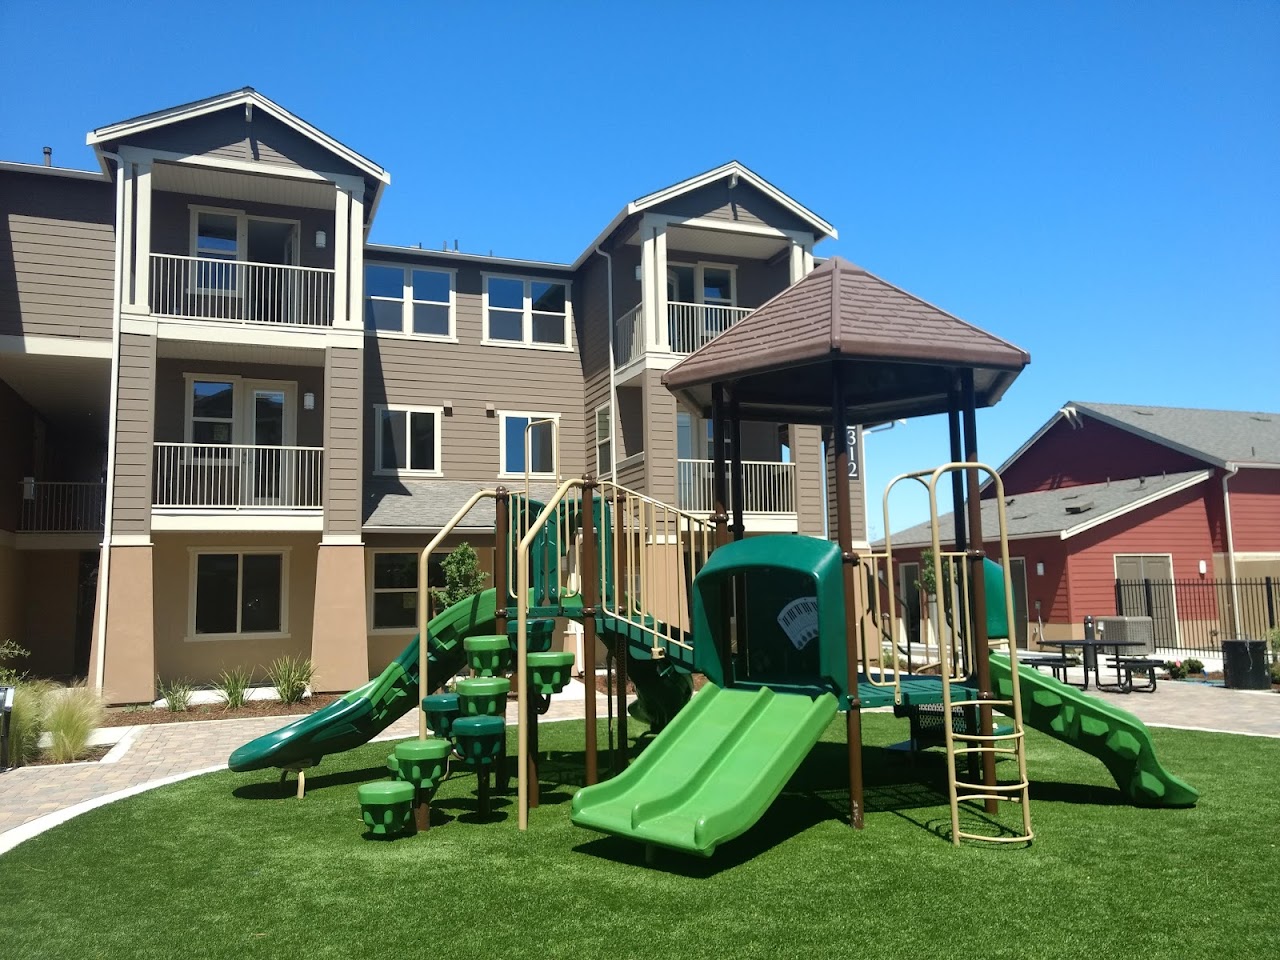 Photo of STONEMAN APARTMENTS. Affordable housing located at 2300 LOVERIDGE ROAD PITTSBURG, CA 94565